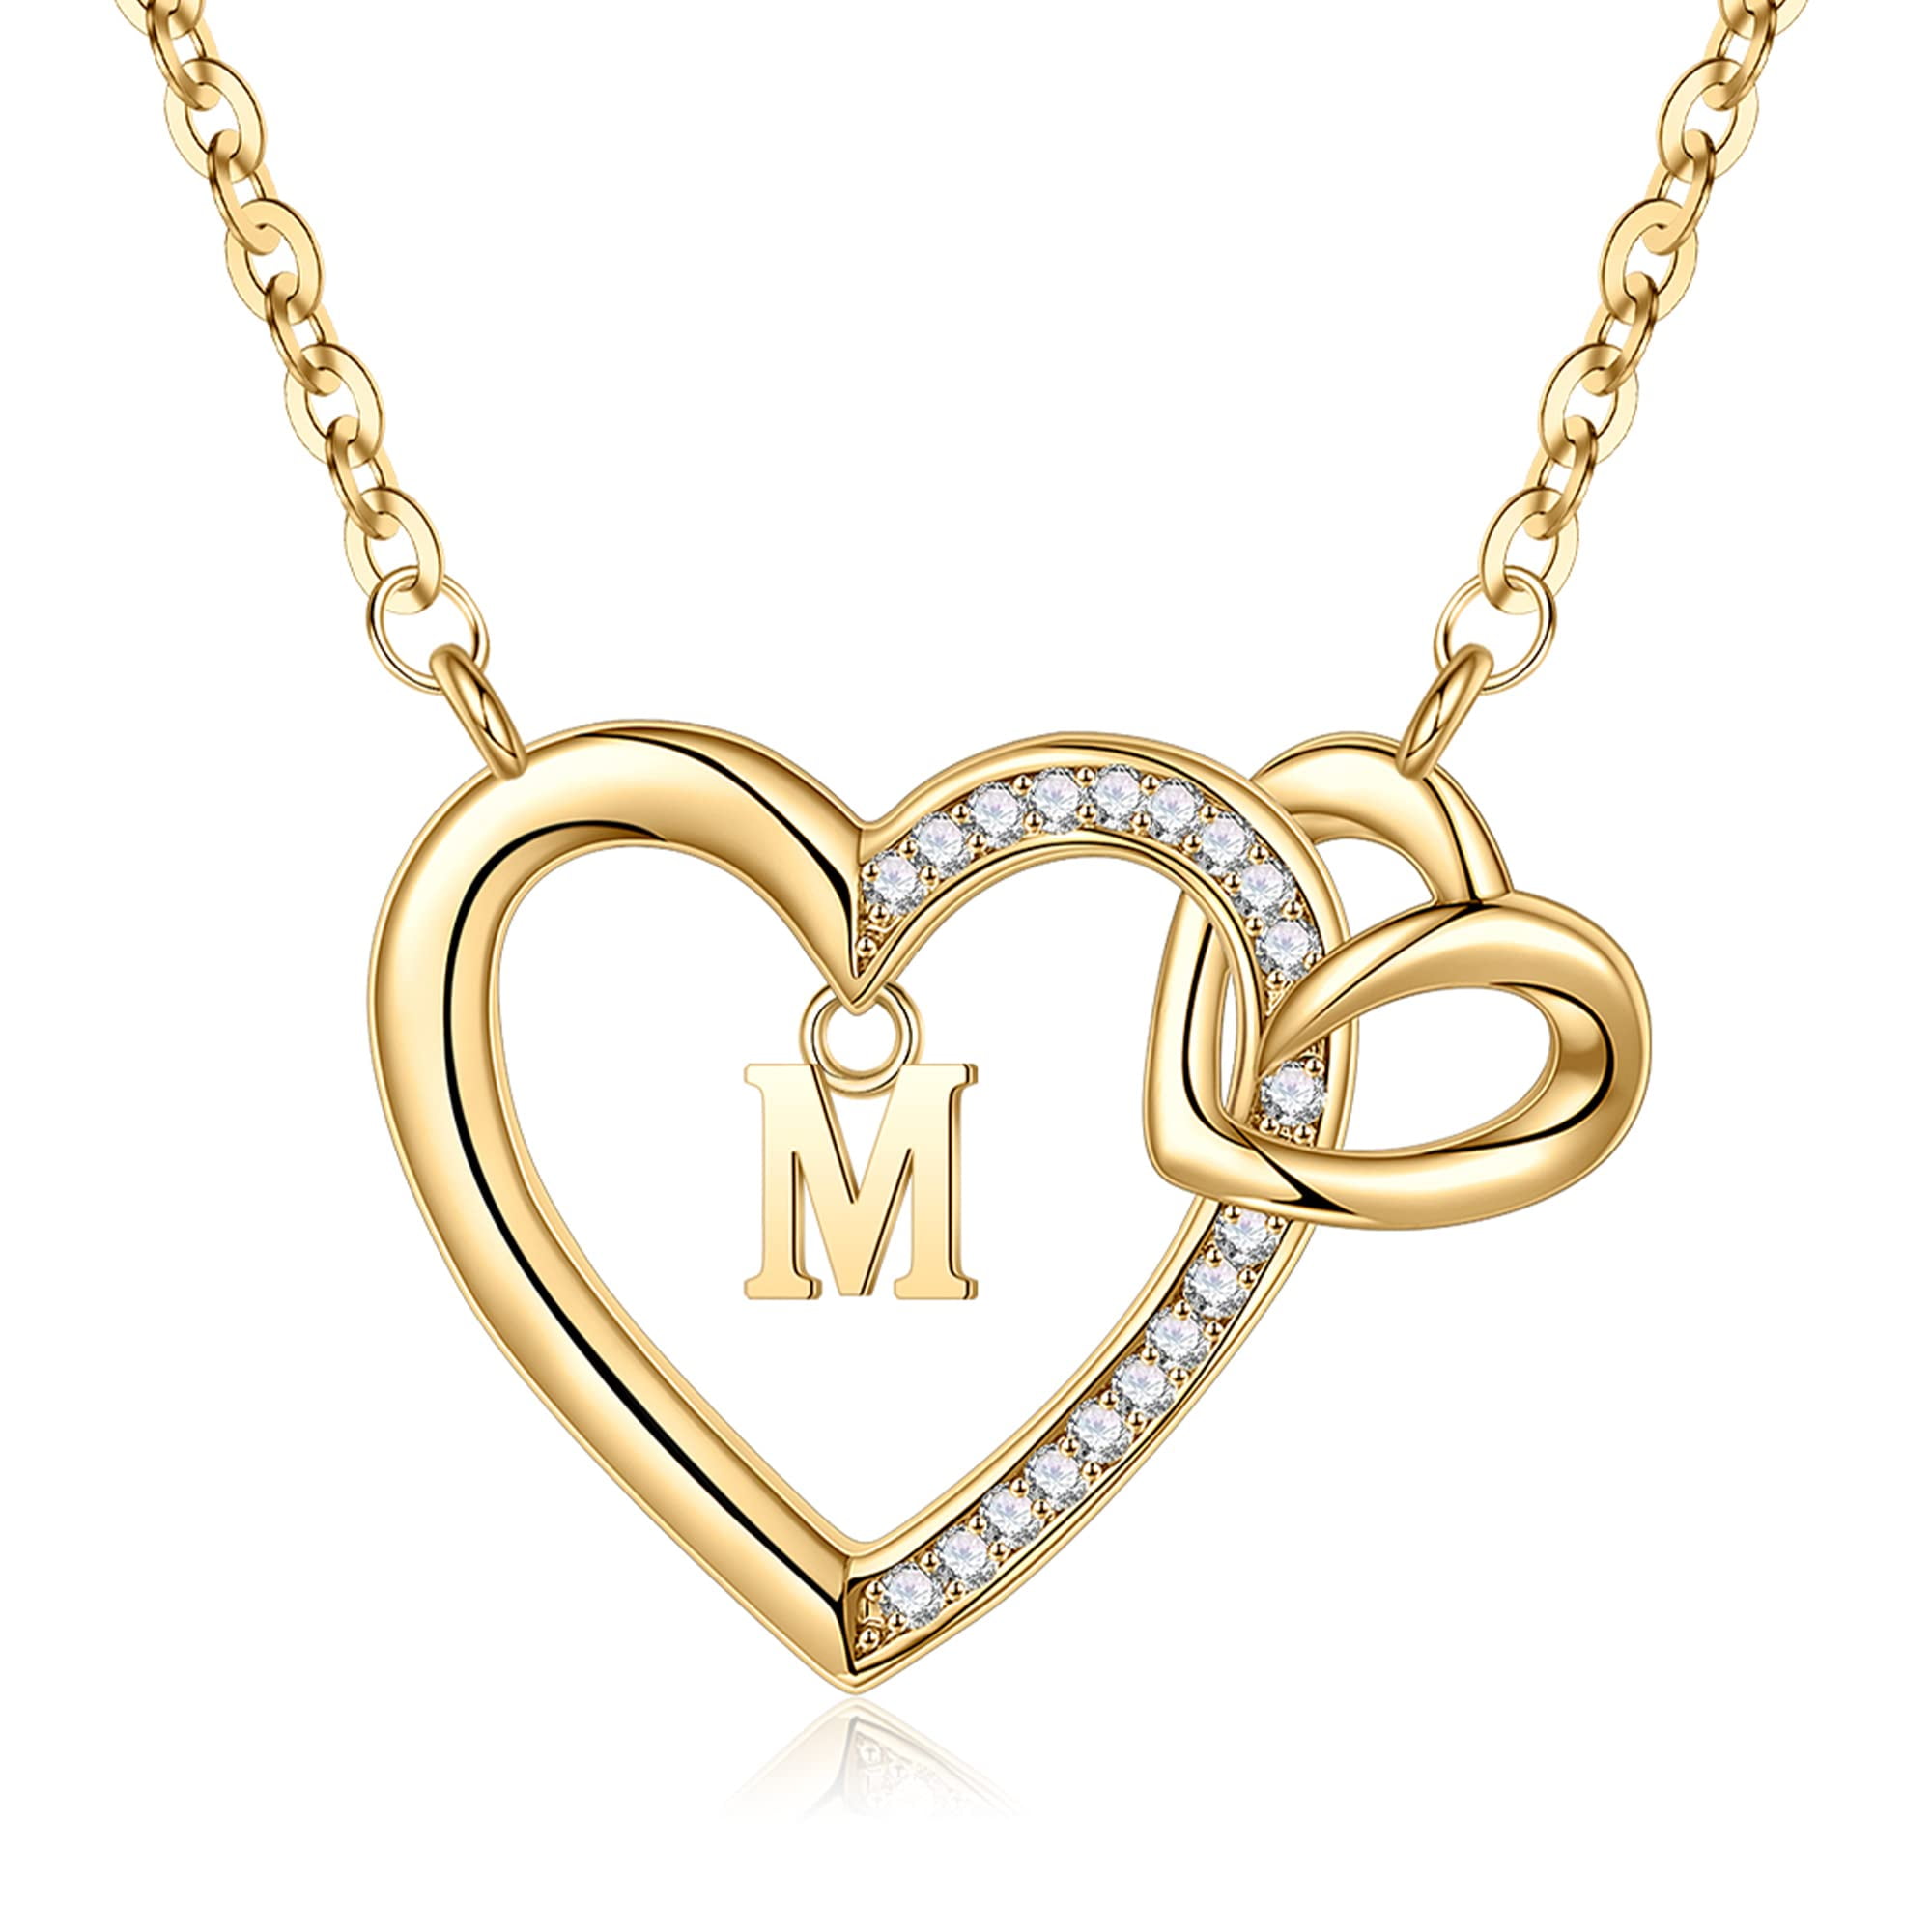 QWZNDZGR Heart Initial Necklaces for Women Girls, 14K Gold Filled Heart  Pendant Necklace Simple Cute Necklaces for Teen Girls Dainty Personalized